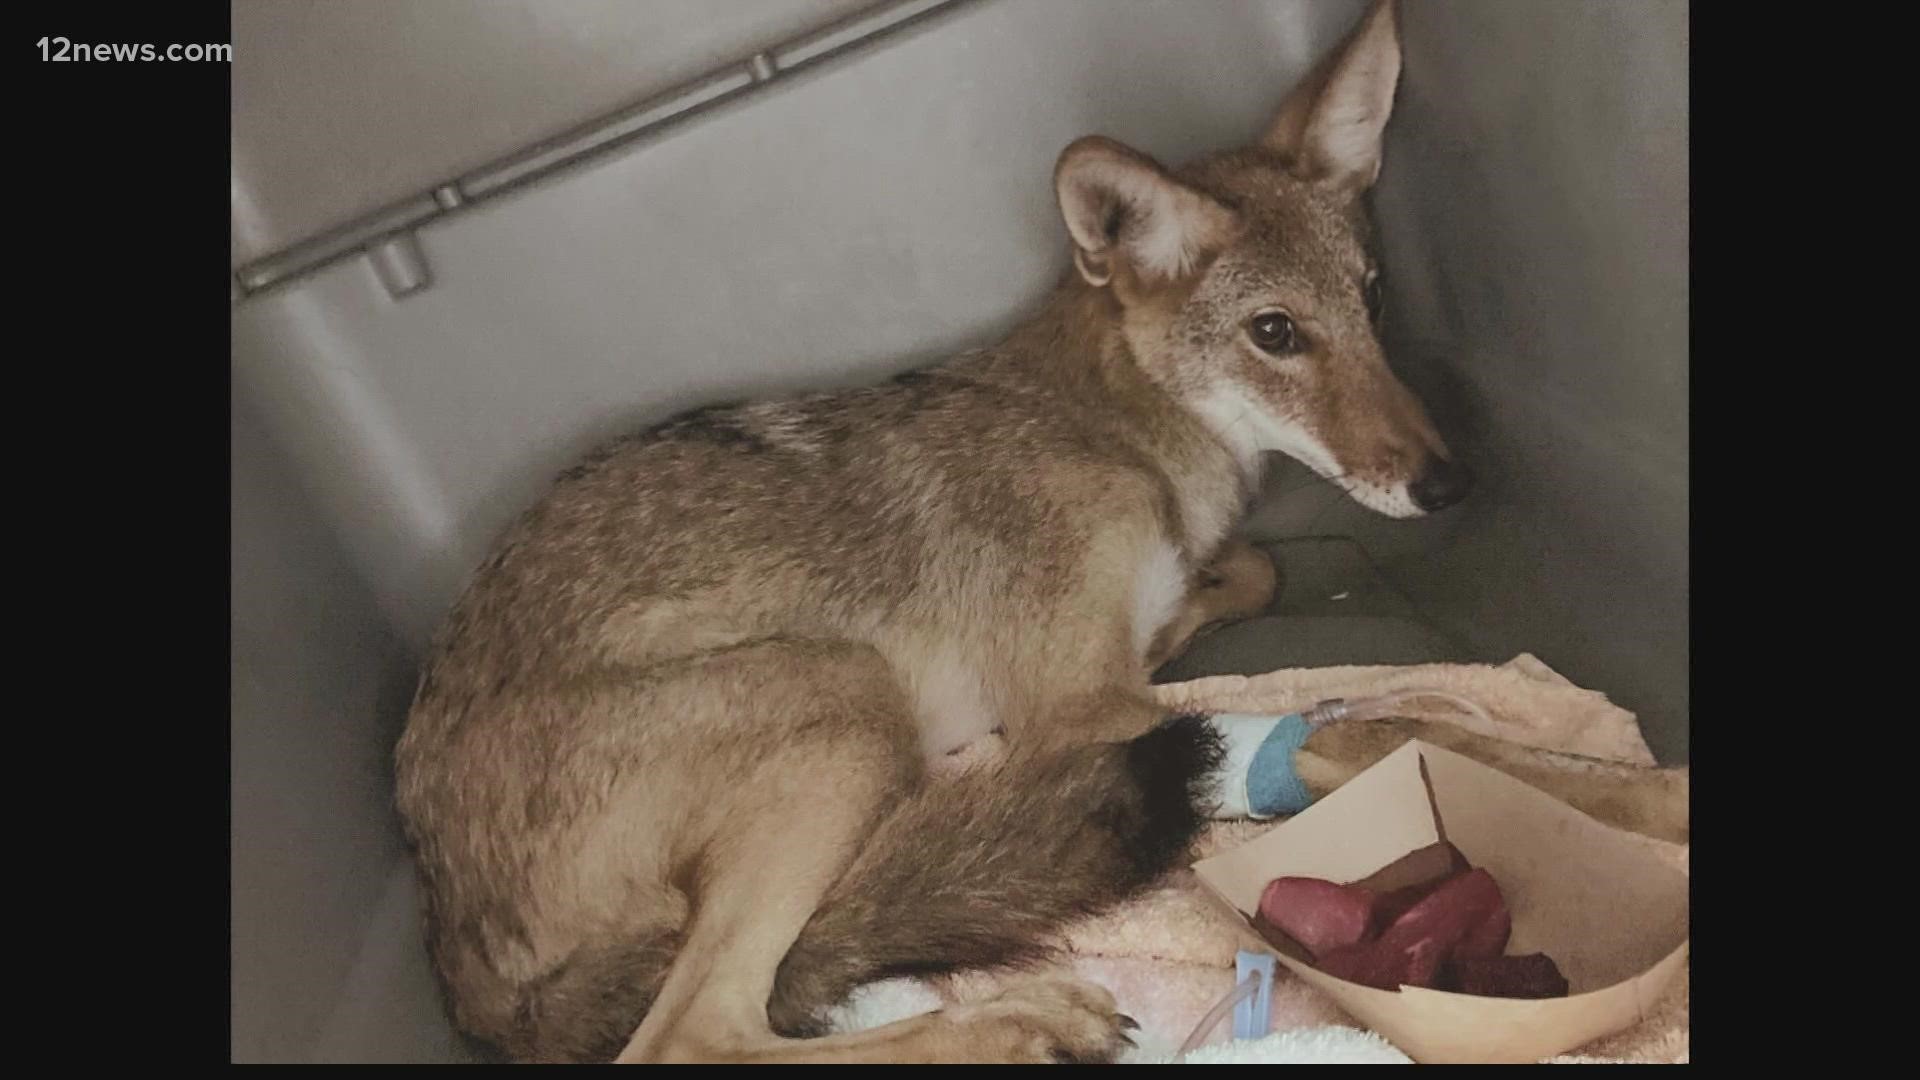 An injured coyote found near an Arizona highway last week is going to be just fine. One of its legs has to be amputated but it will be able to have a normal life.